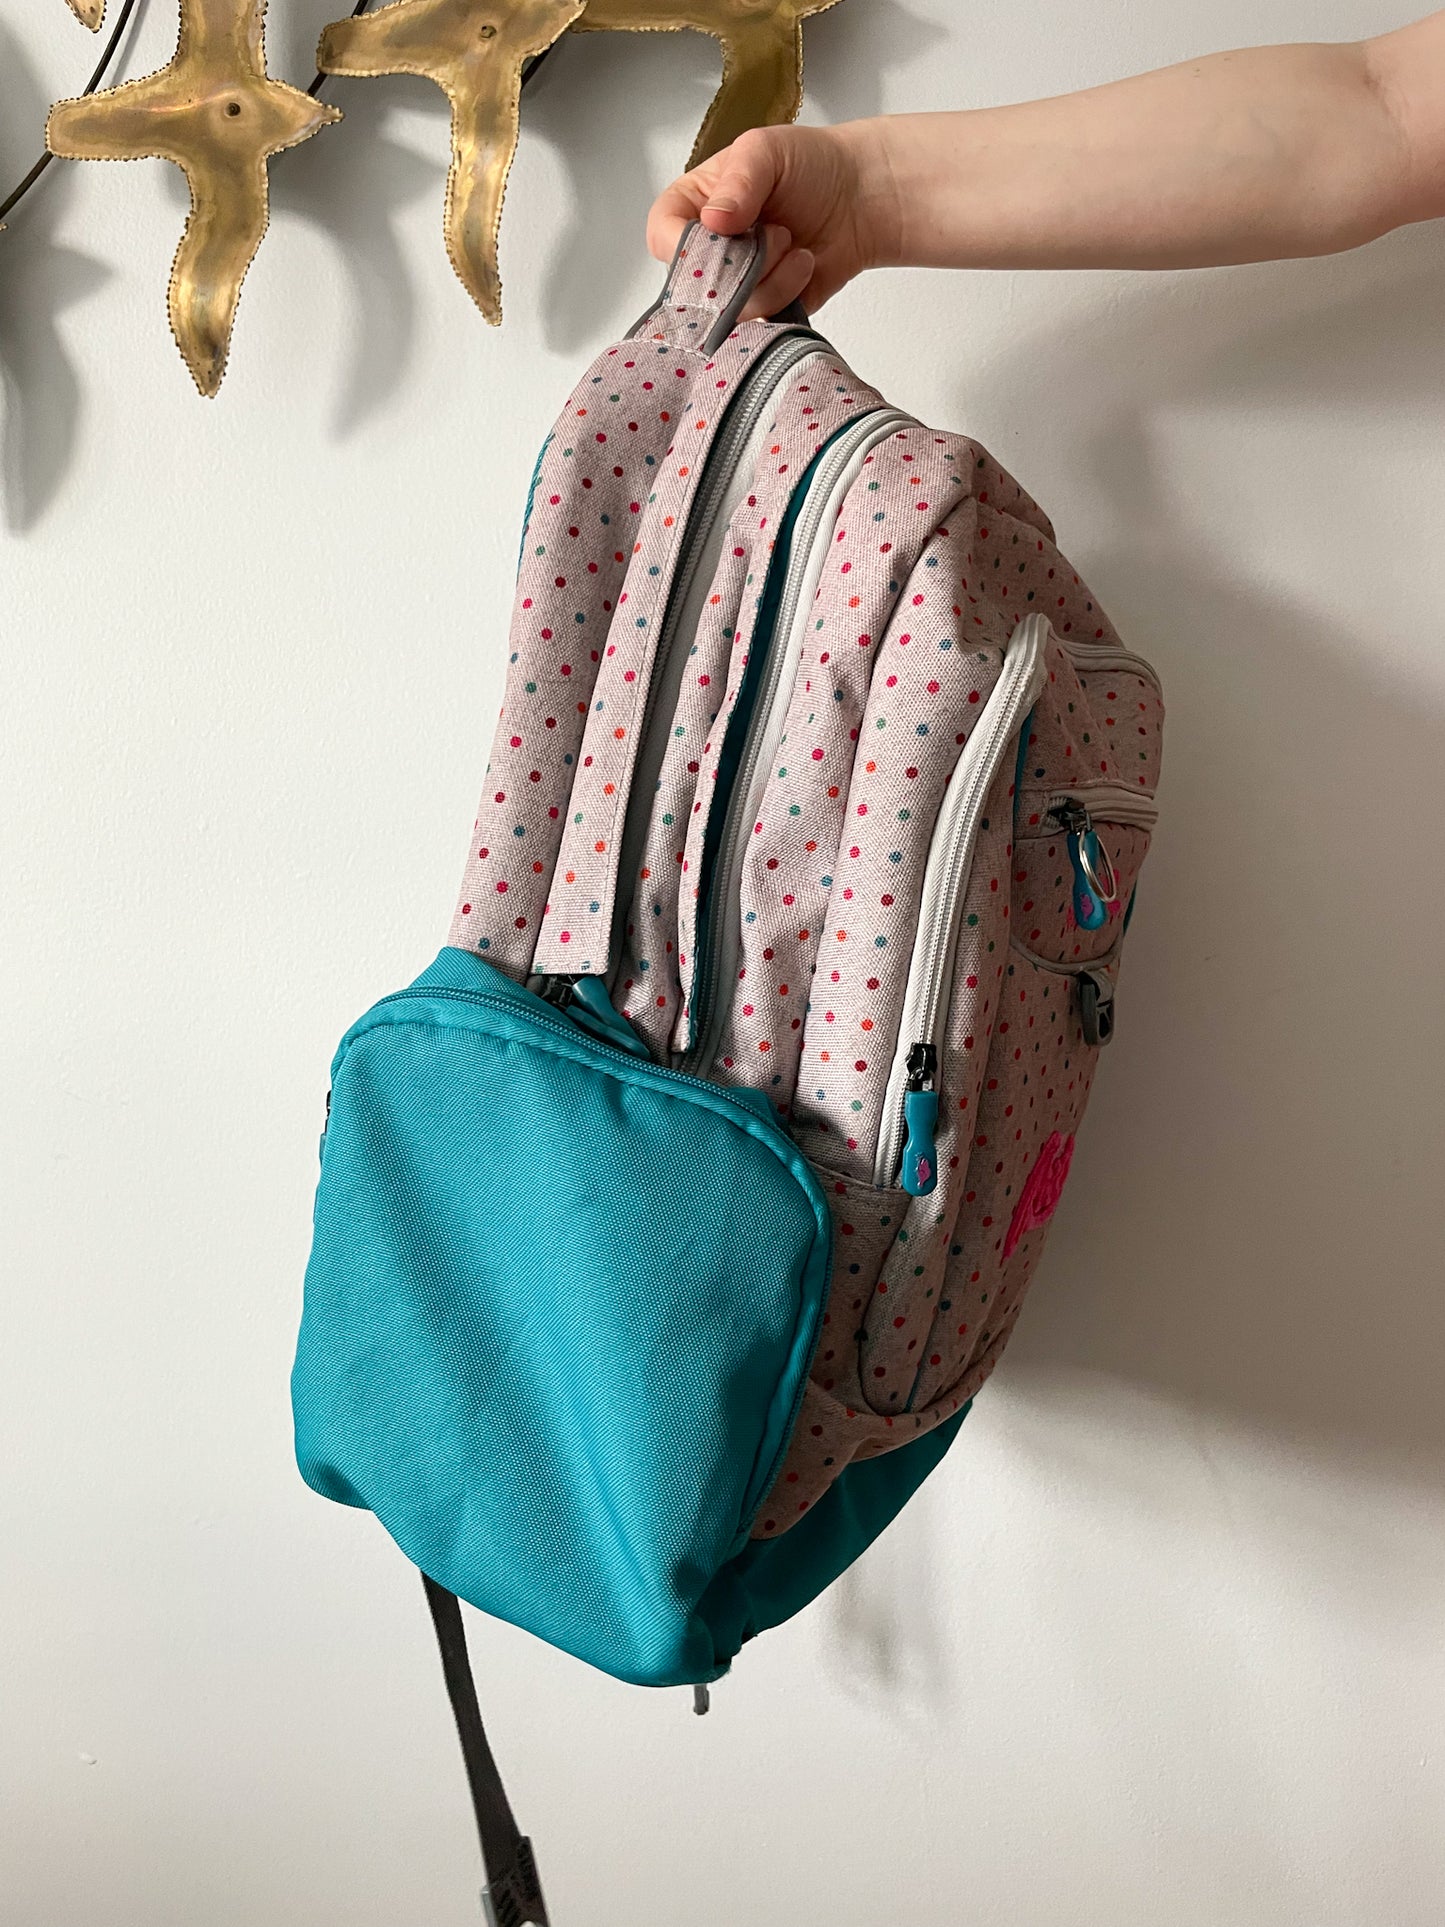 Roots Signature Teal Pink Polkadot Lightweight Laptop Backpack